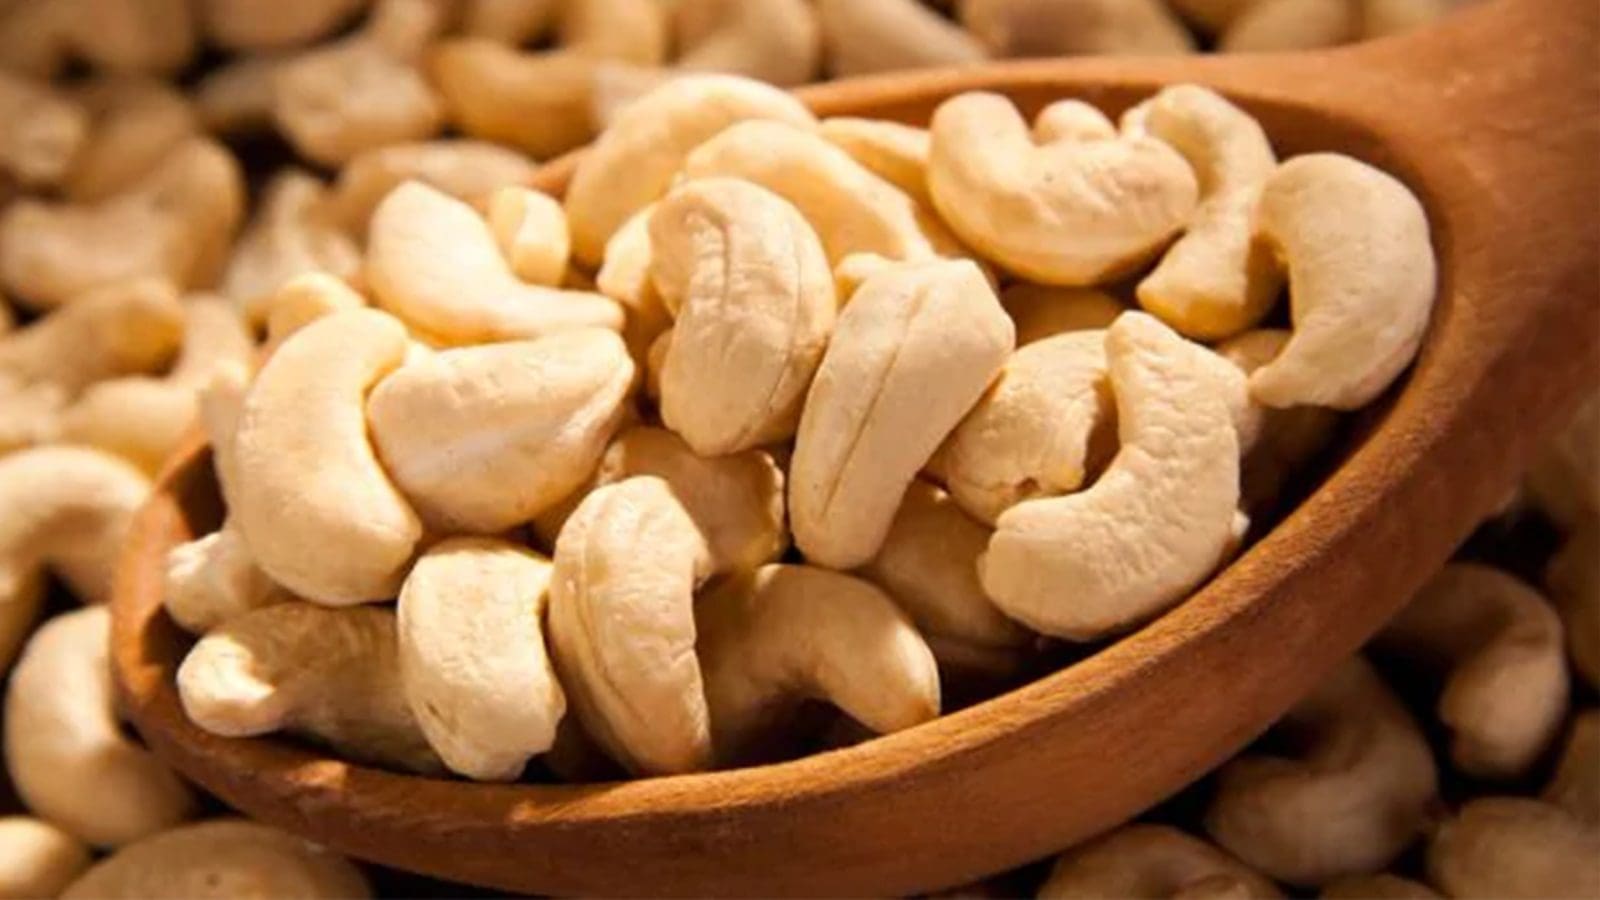 Tanzanian cashew nut farmers urged to use proper pesticides for global competitiveness